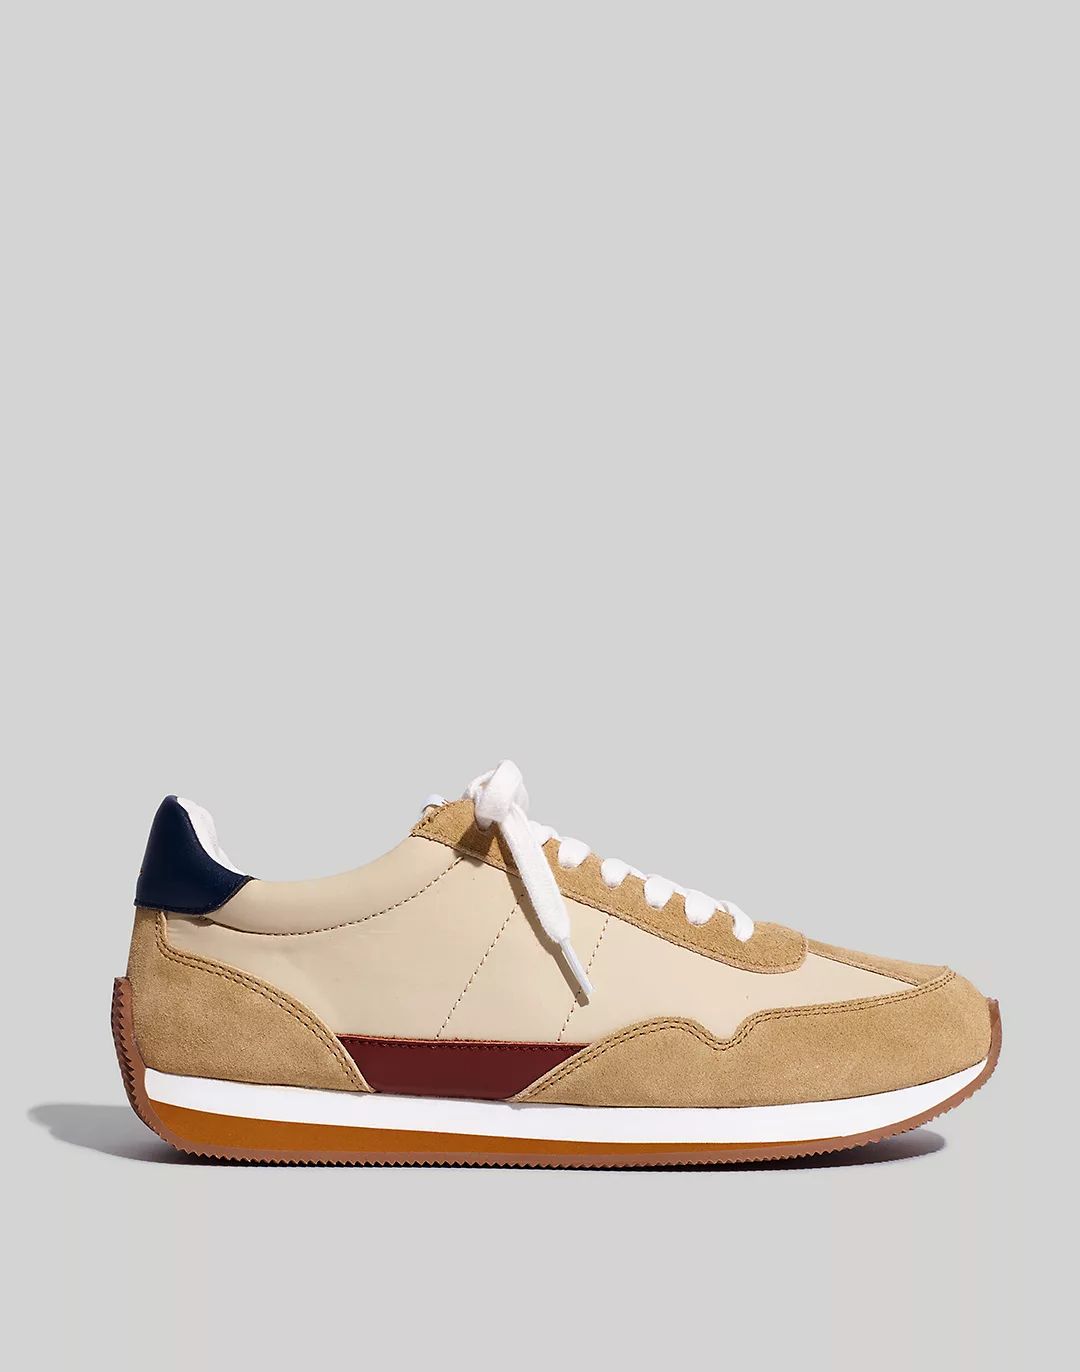 League Sneakers in Washed Nubuck and Suede | Madewell